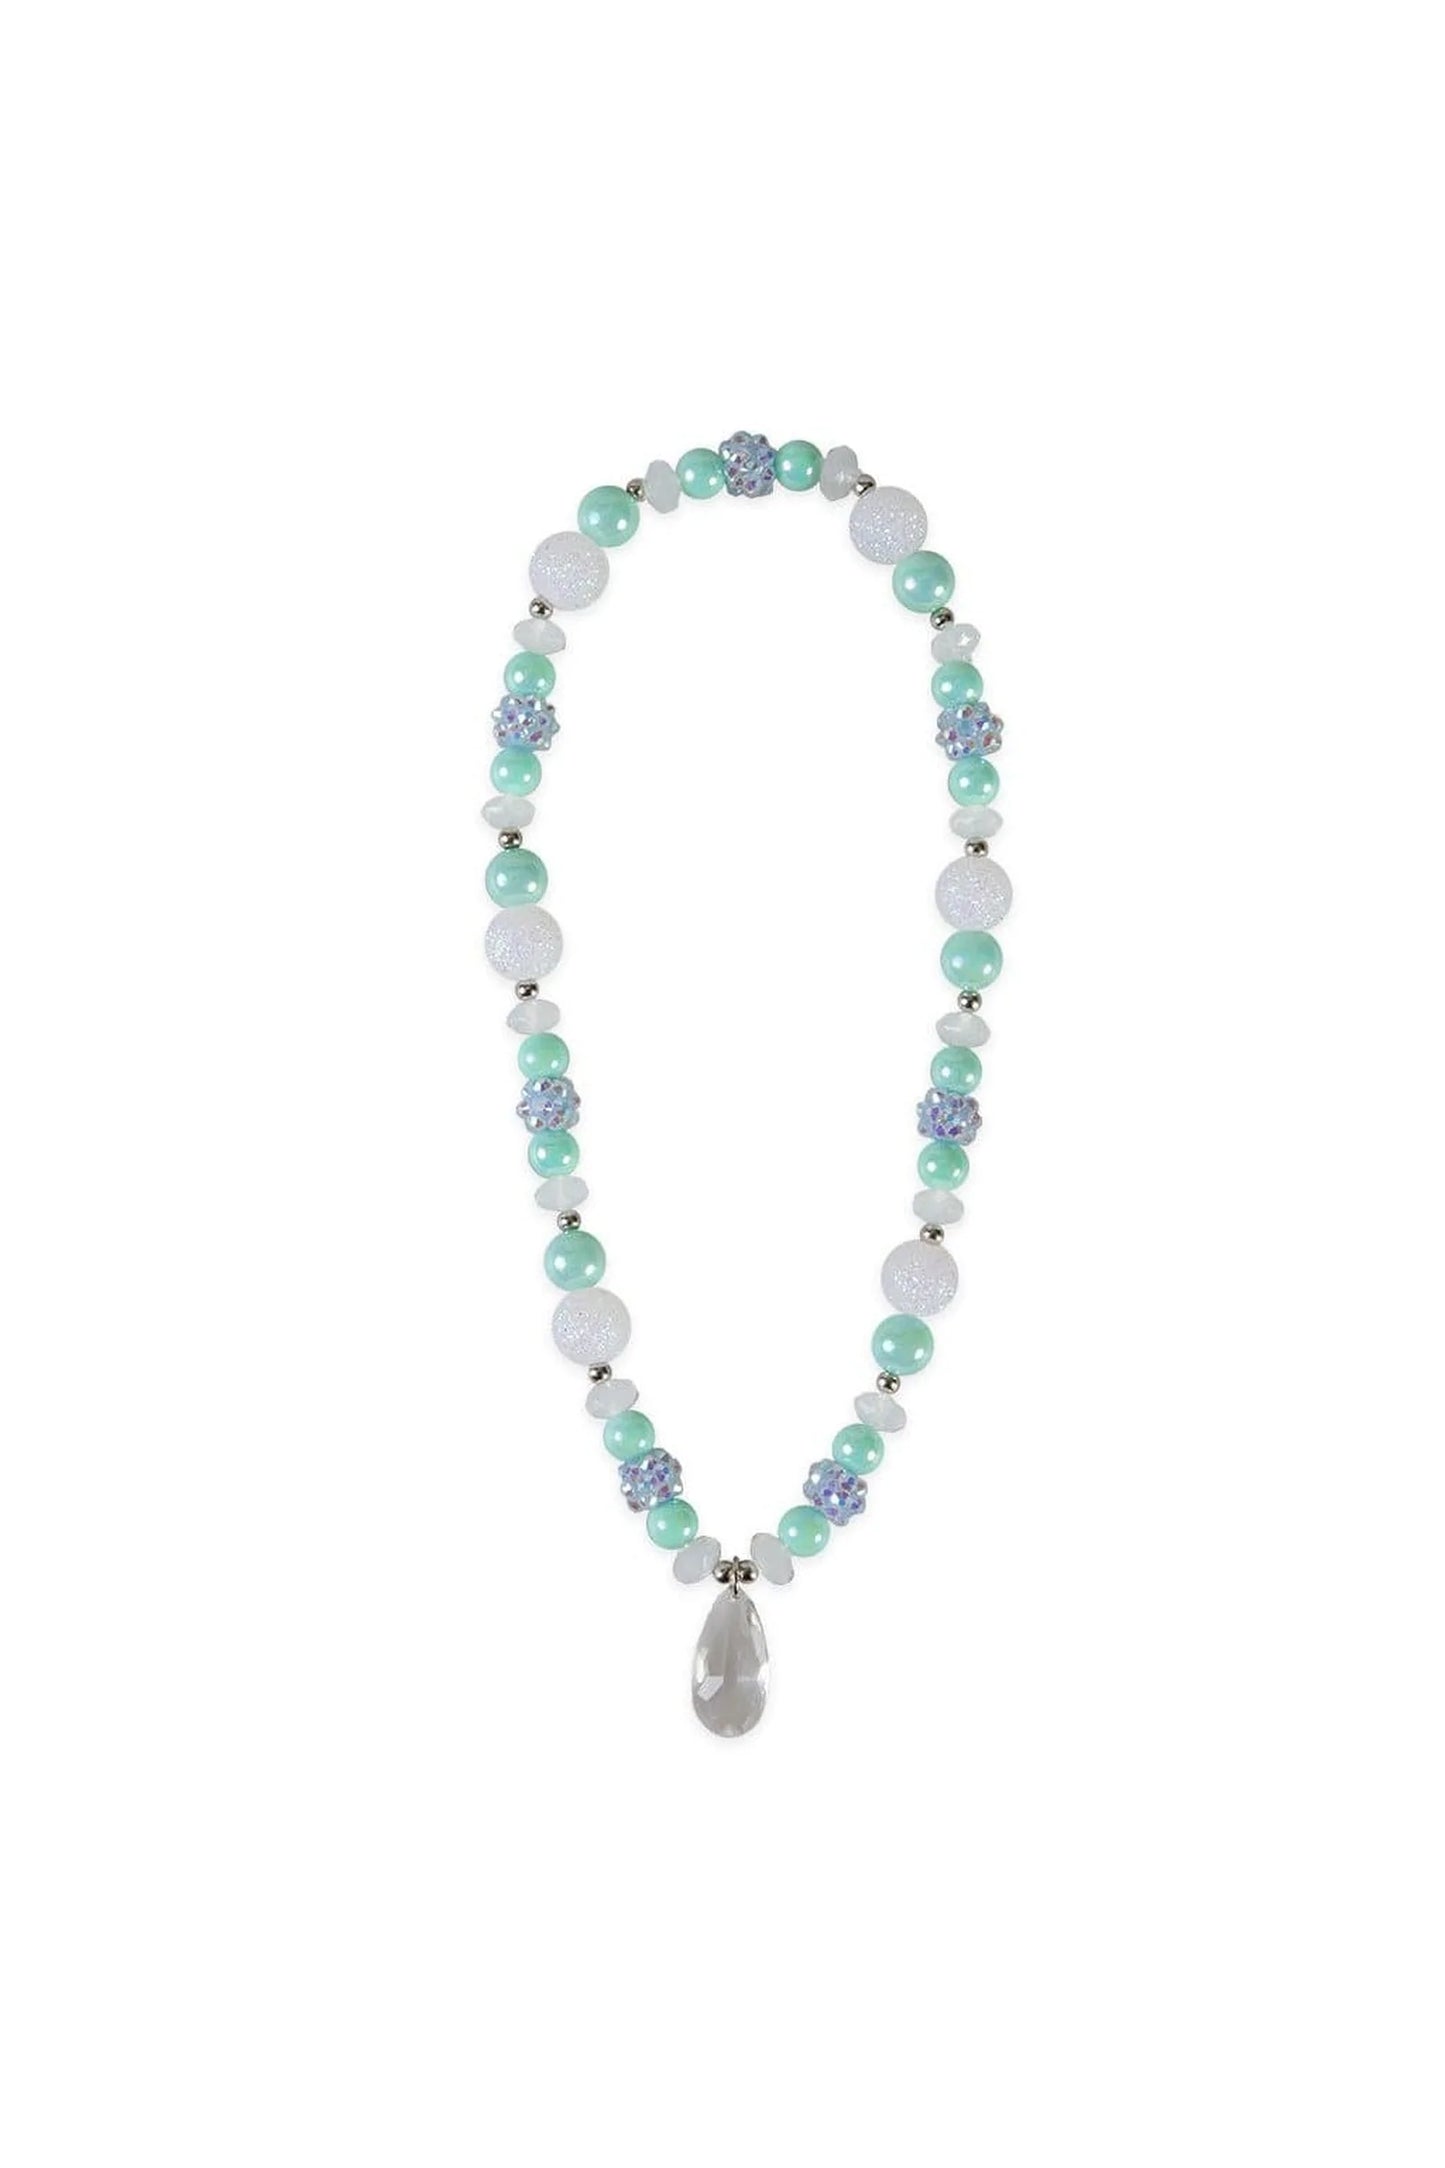 Frozen Crystal Necklace - Magpies Paducah